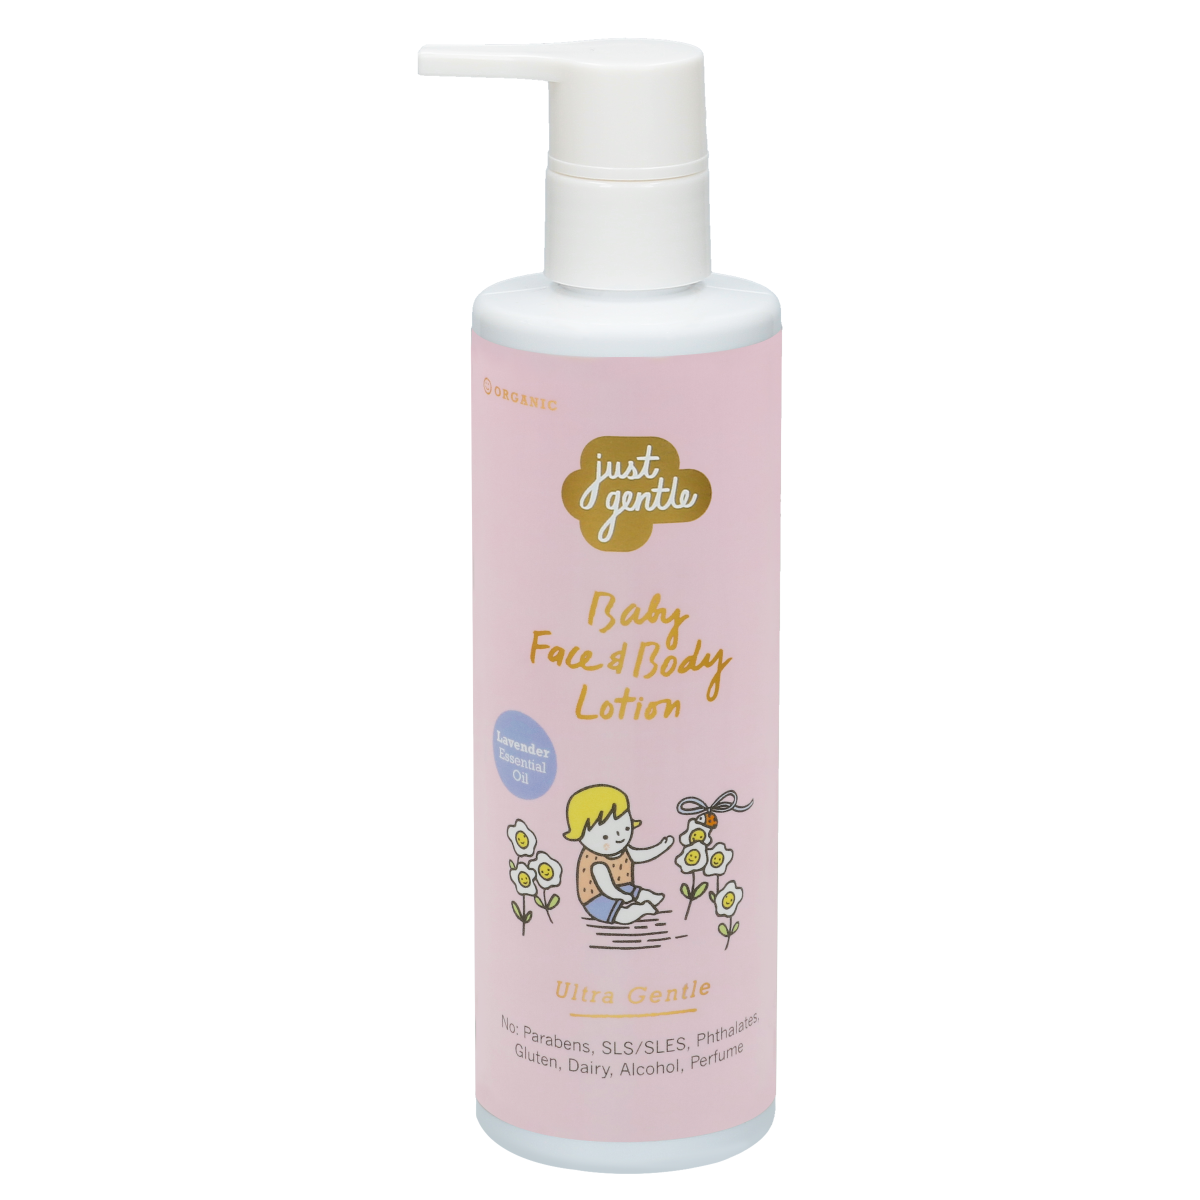 Just Gentle - Baby Face & Body Lotion - Lavender Scent